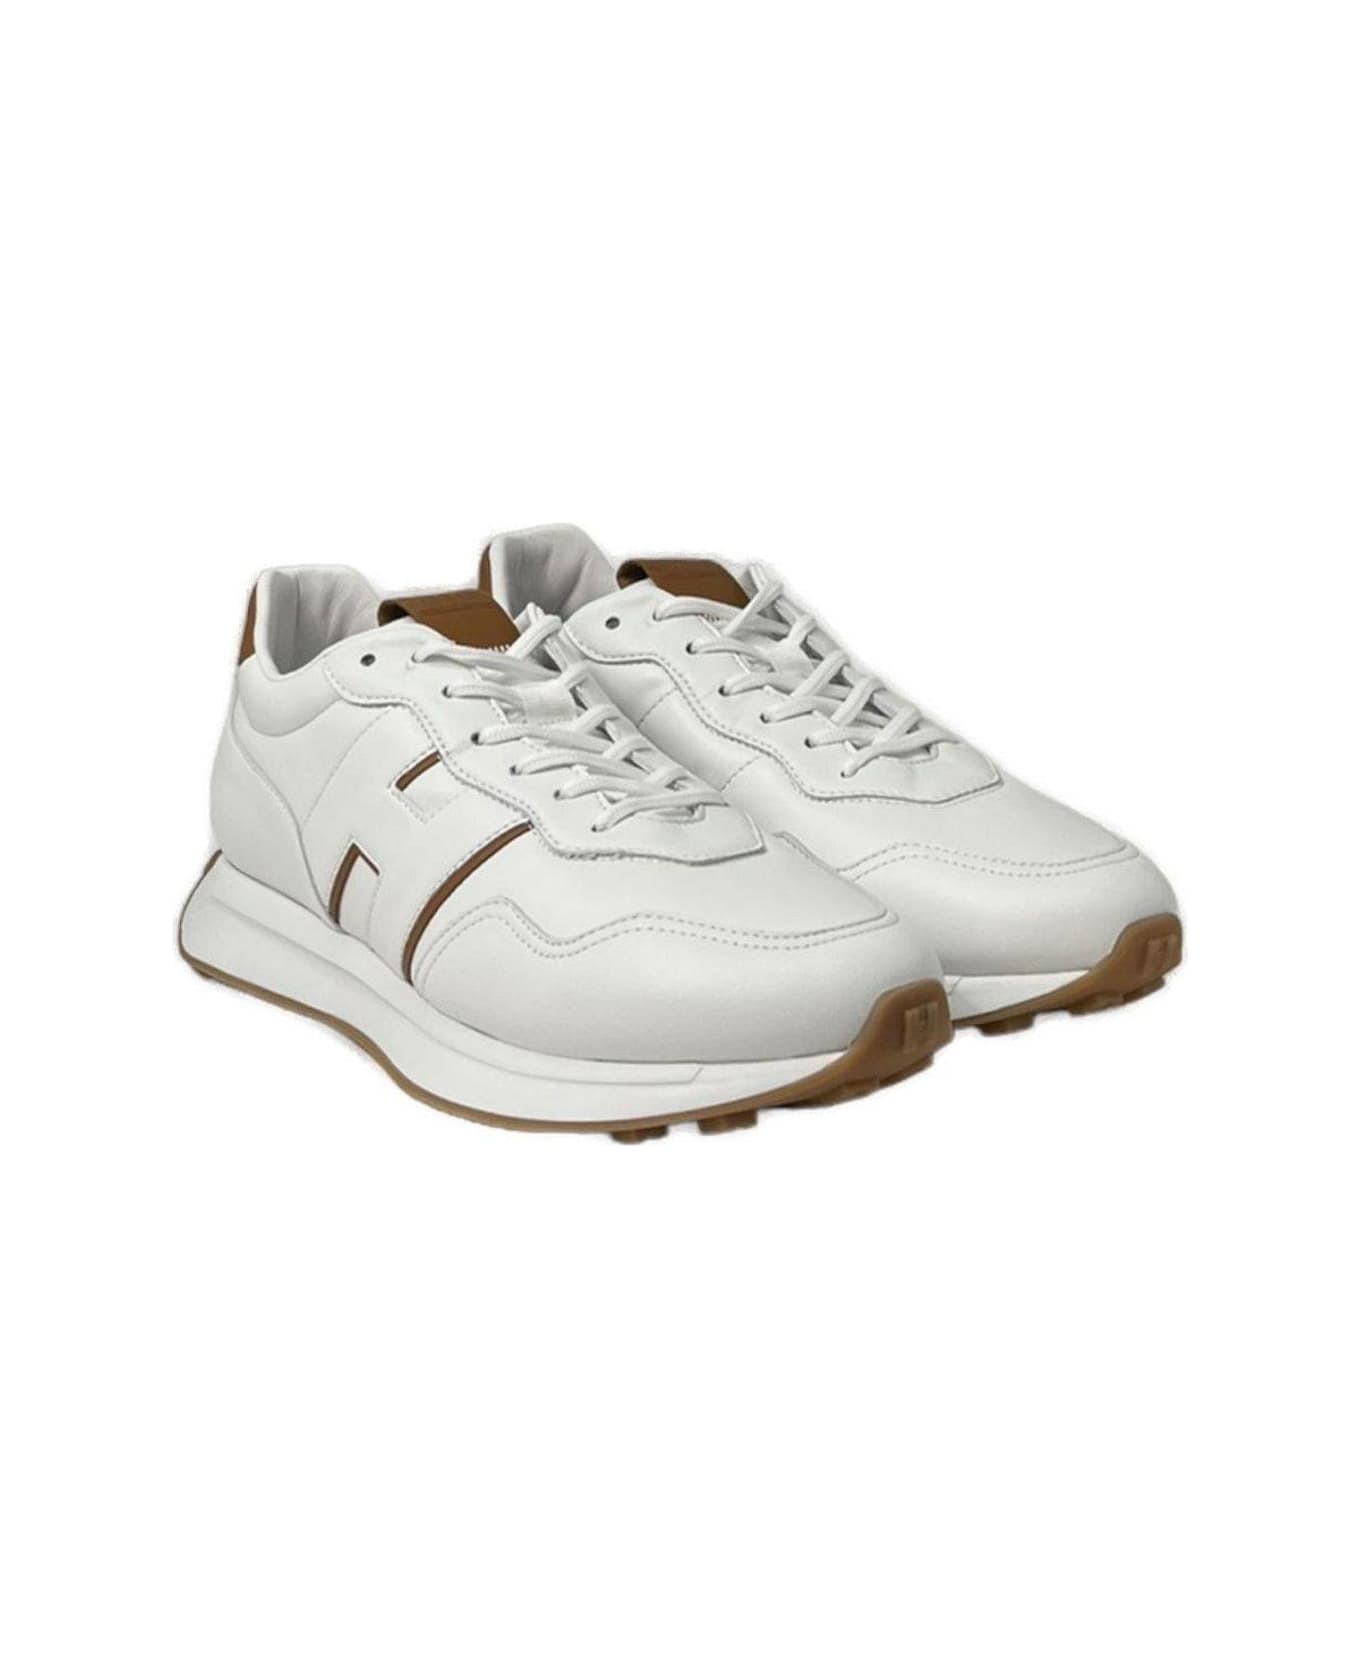 Hogan H601 Leather Sneakers - White